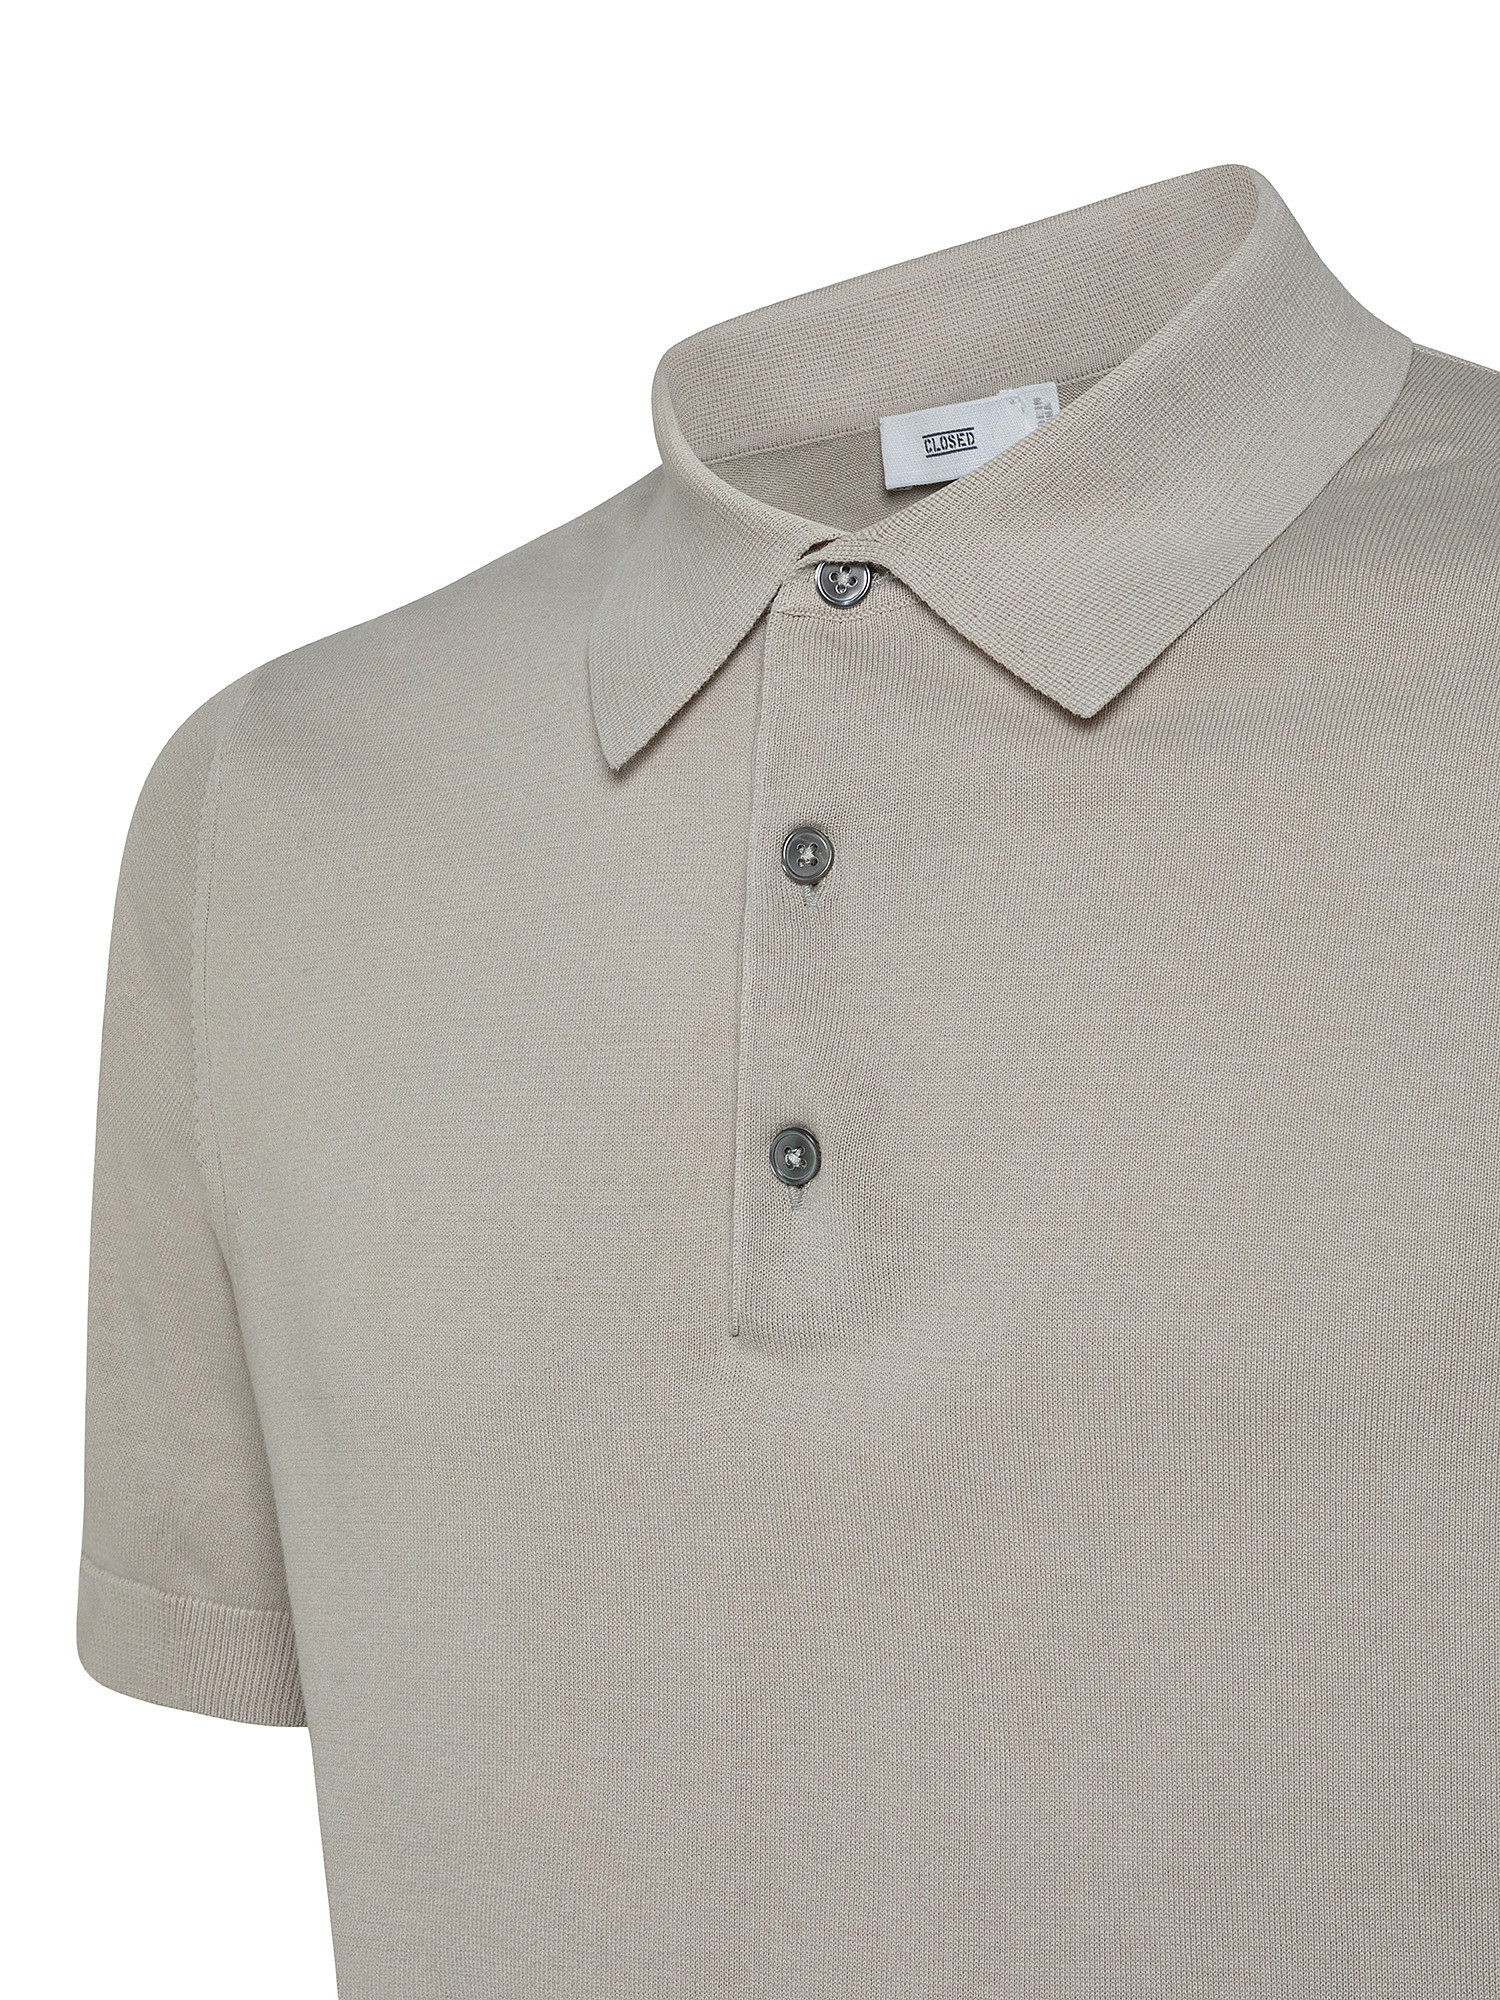 Cotton knit polo shirt, Light Grey, large image number 2